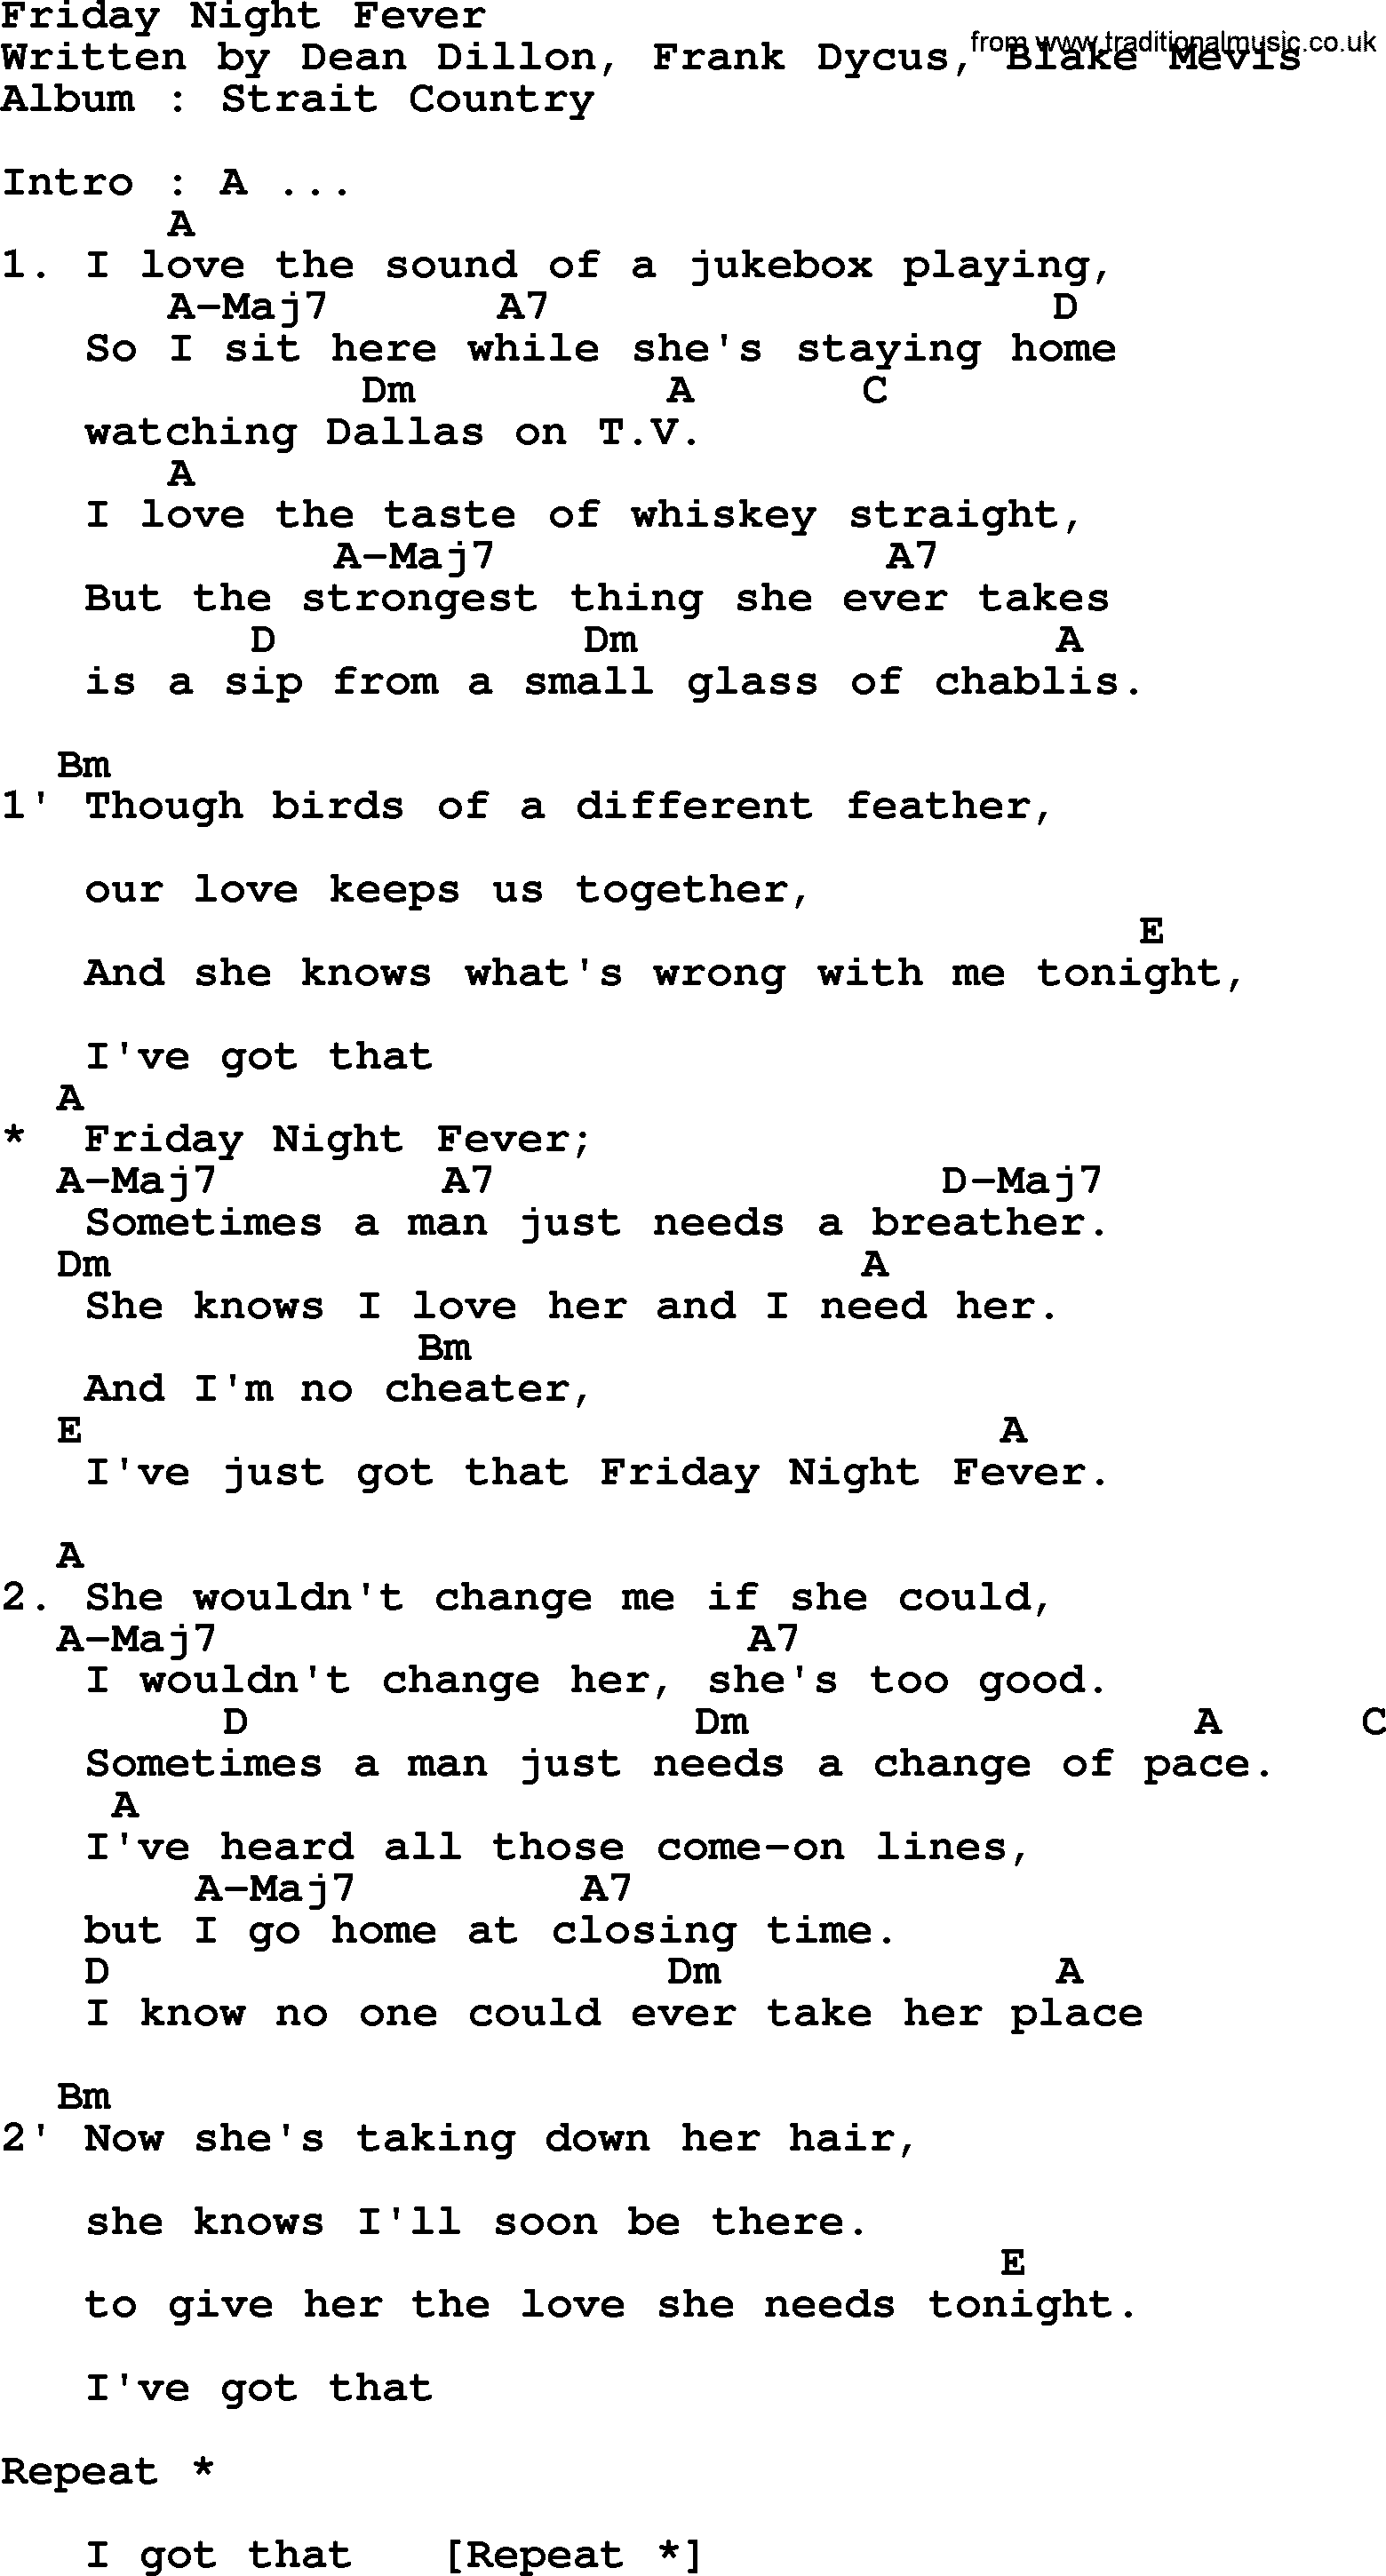 George Strait song: Friday Night Fever, lyrics and chords